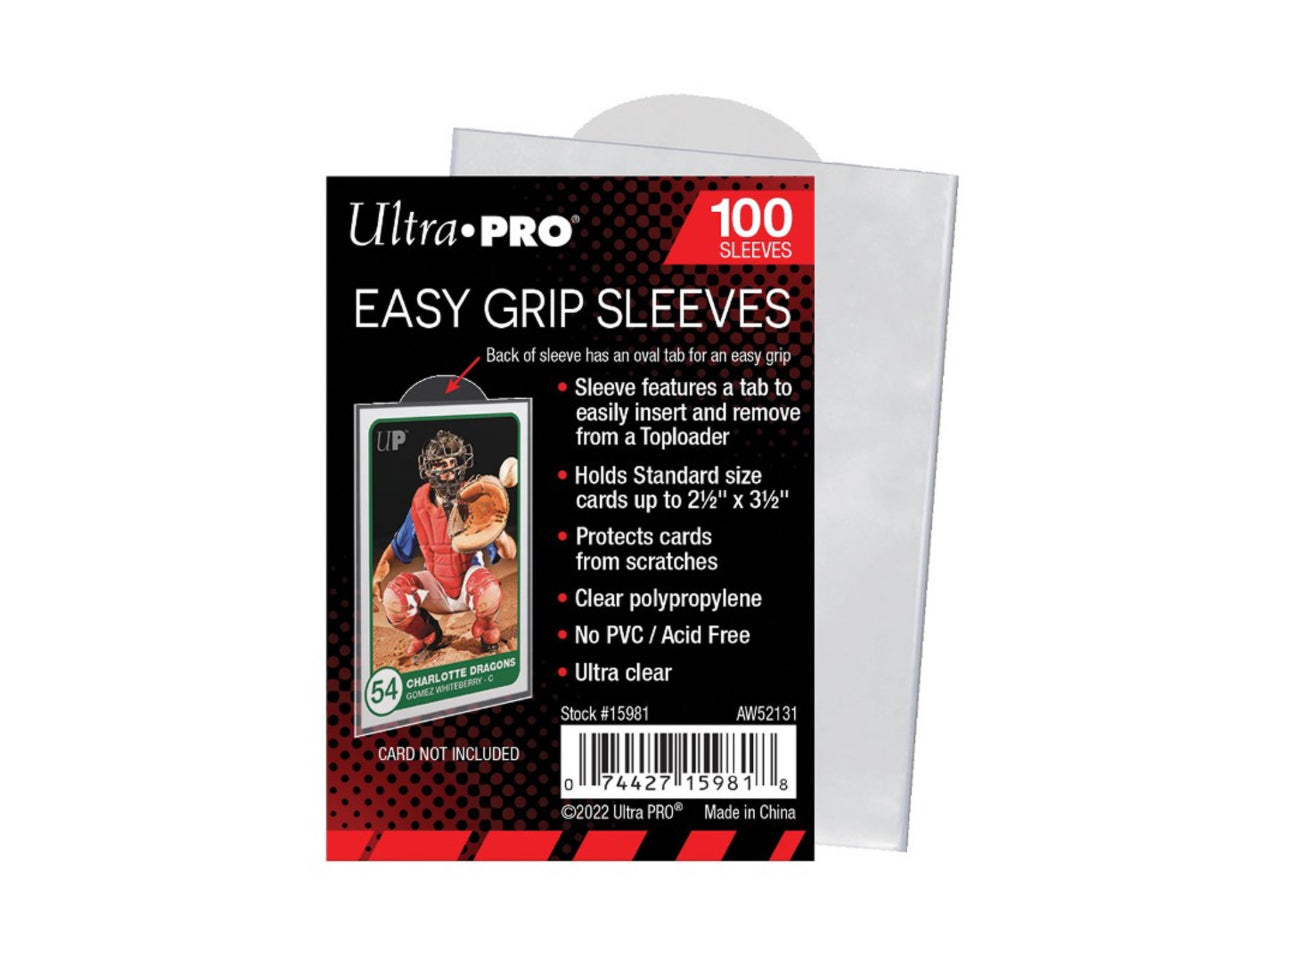 Ultra Pro Easy Grip Sleeves, 100ct